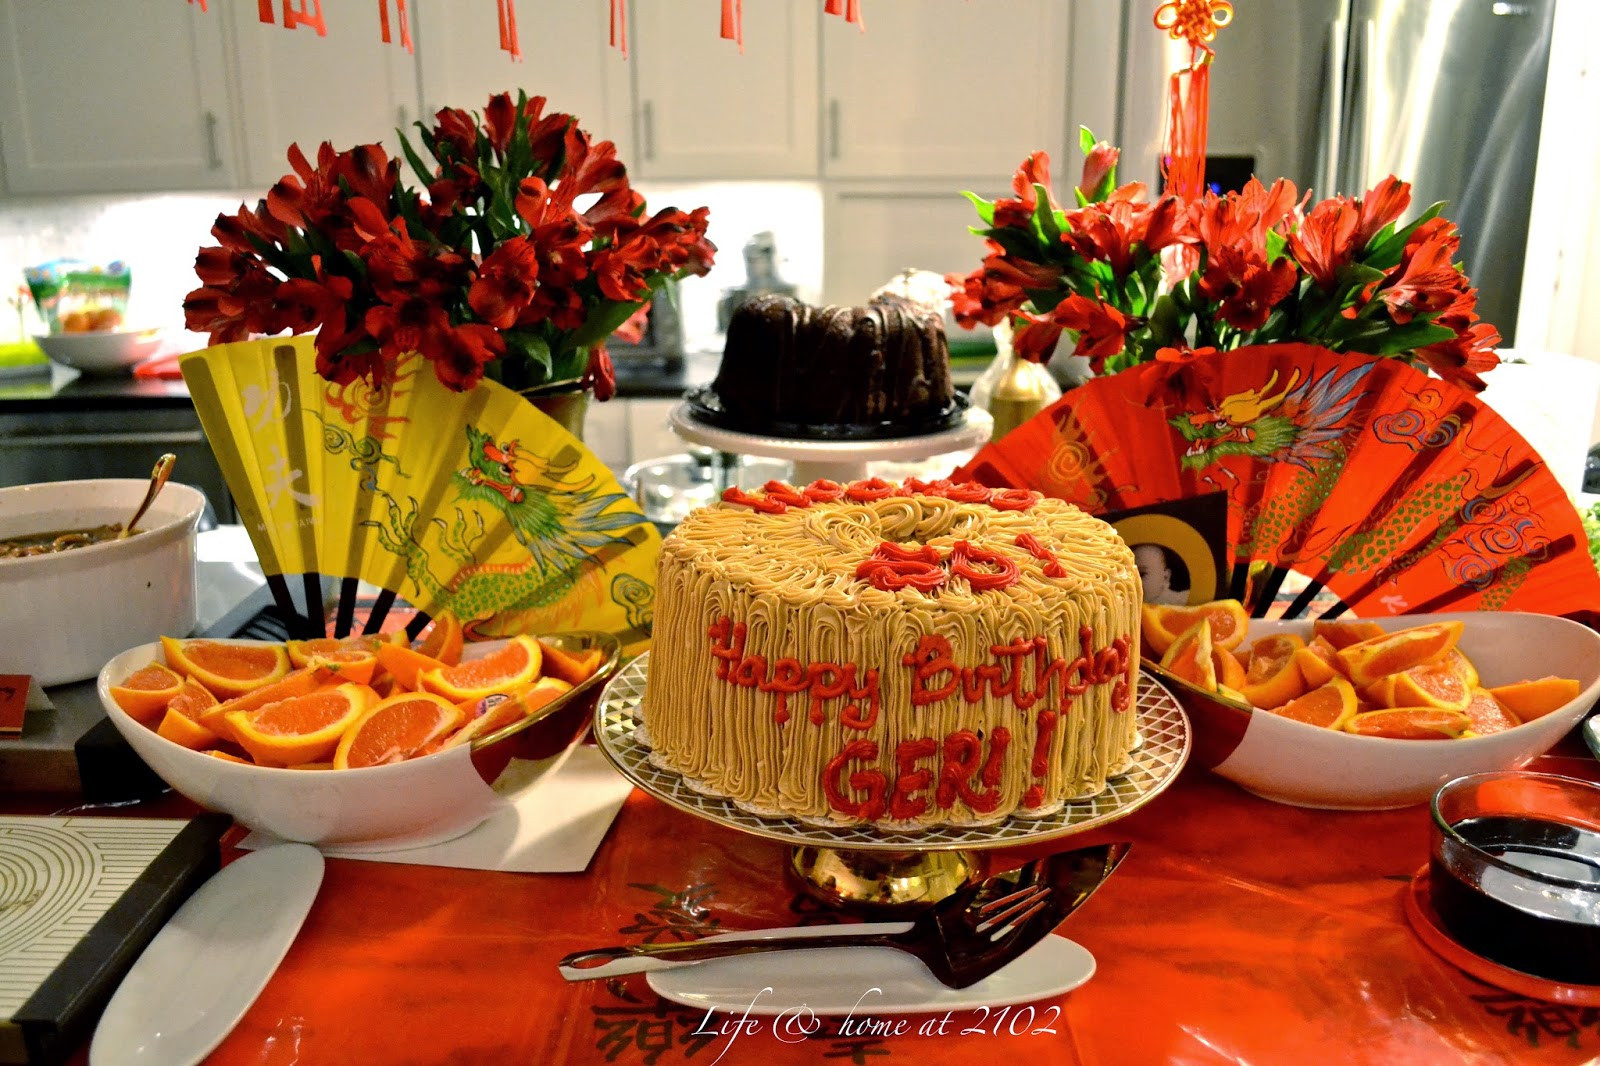 Chinese Party Food Ideas
 Life & Home at 2102 A Chinese Birthday Party